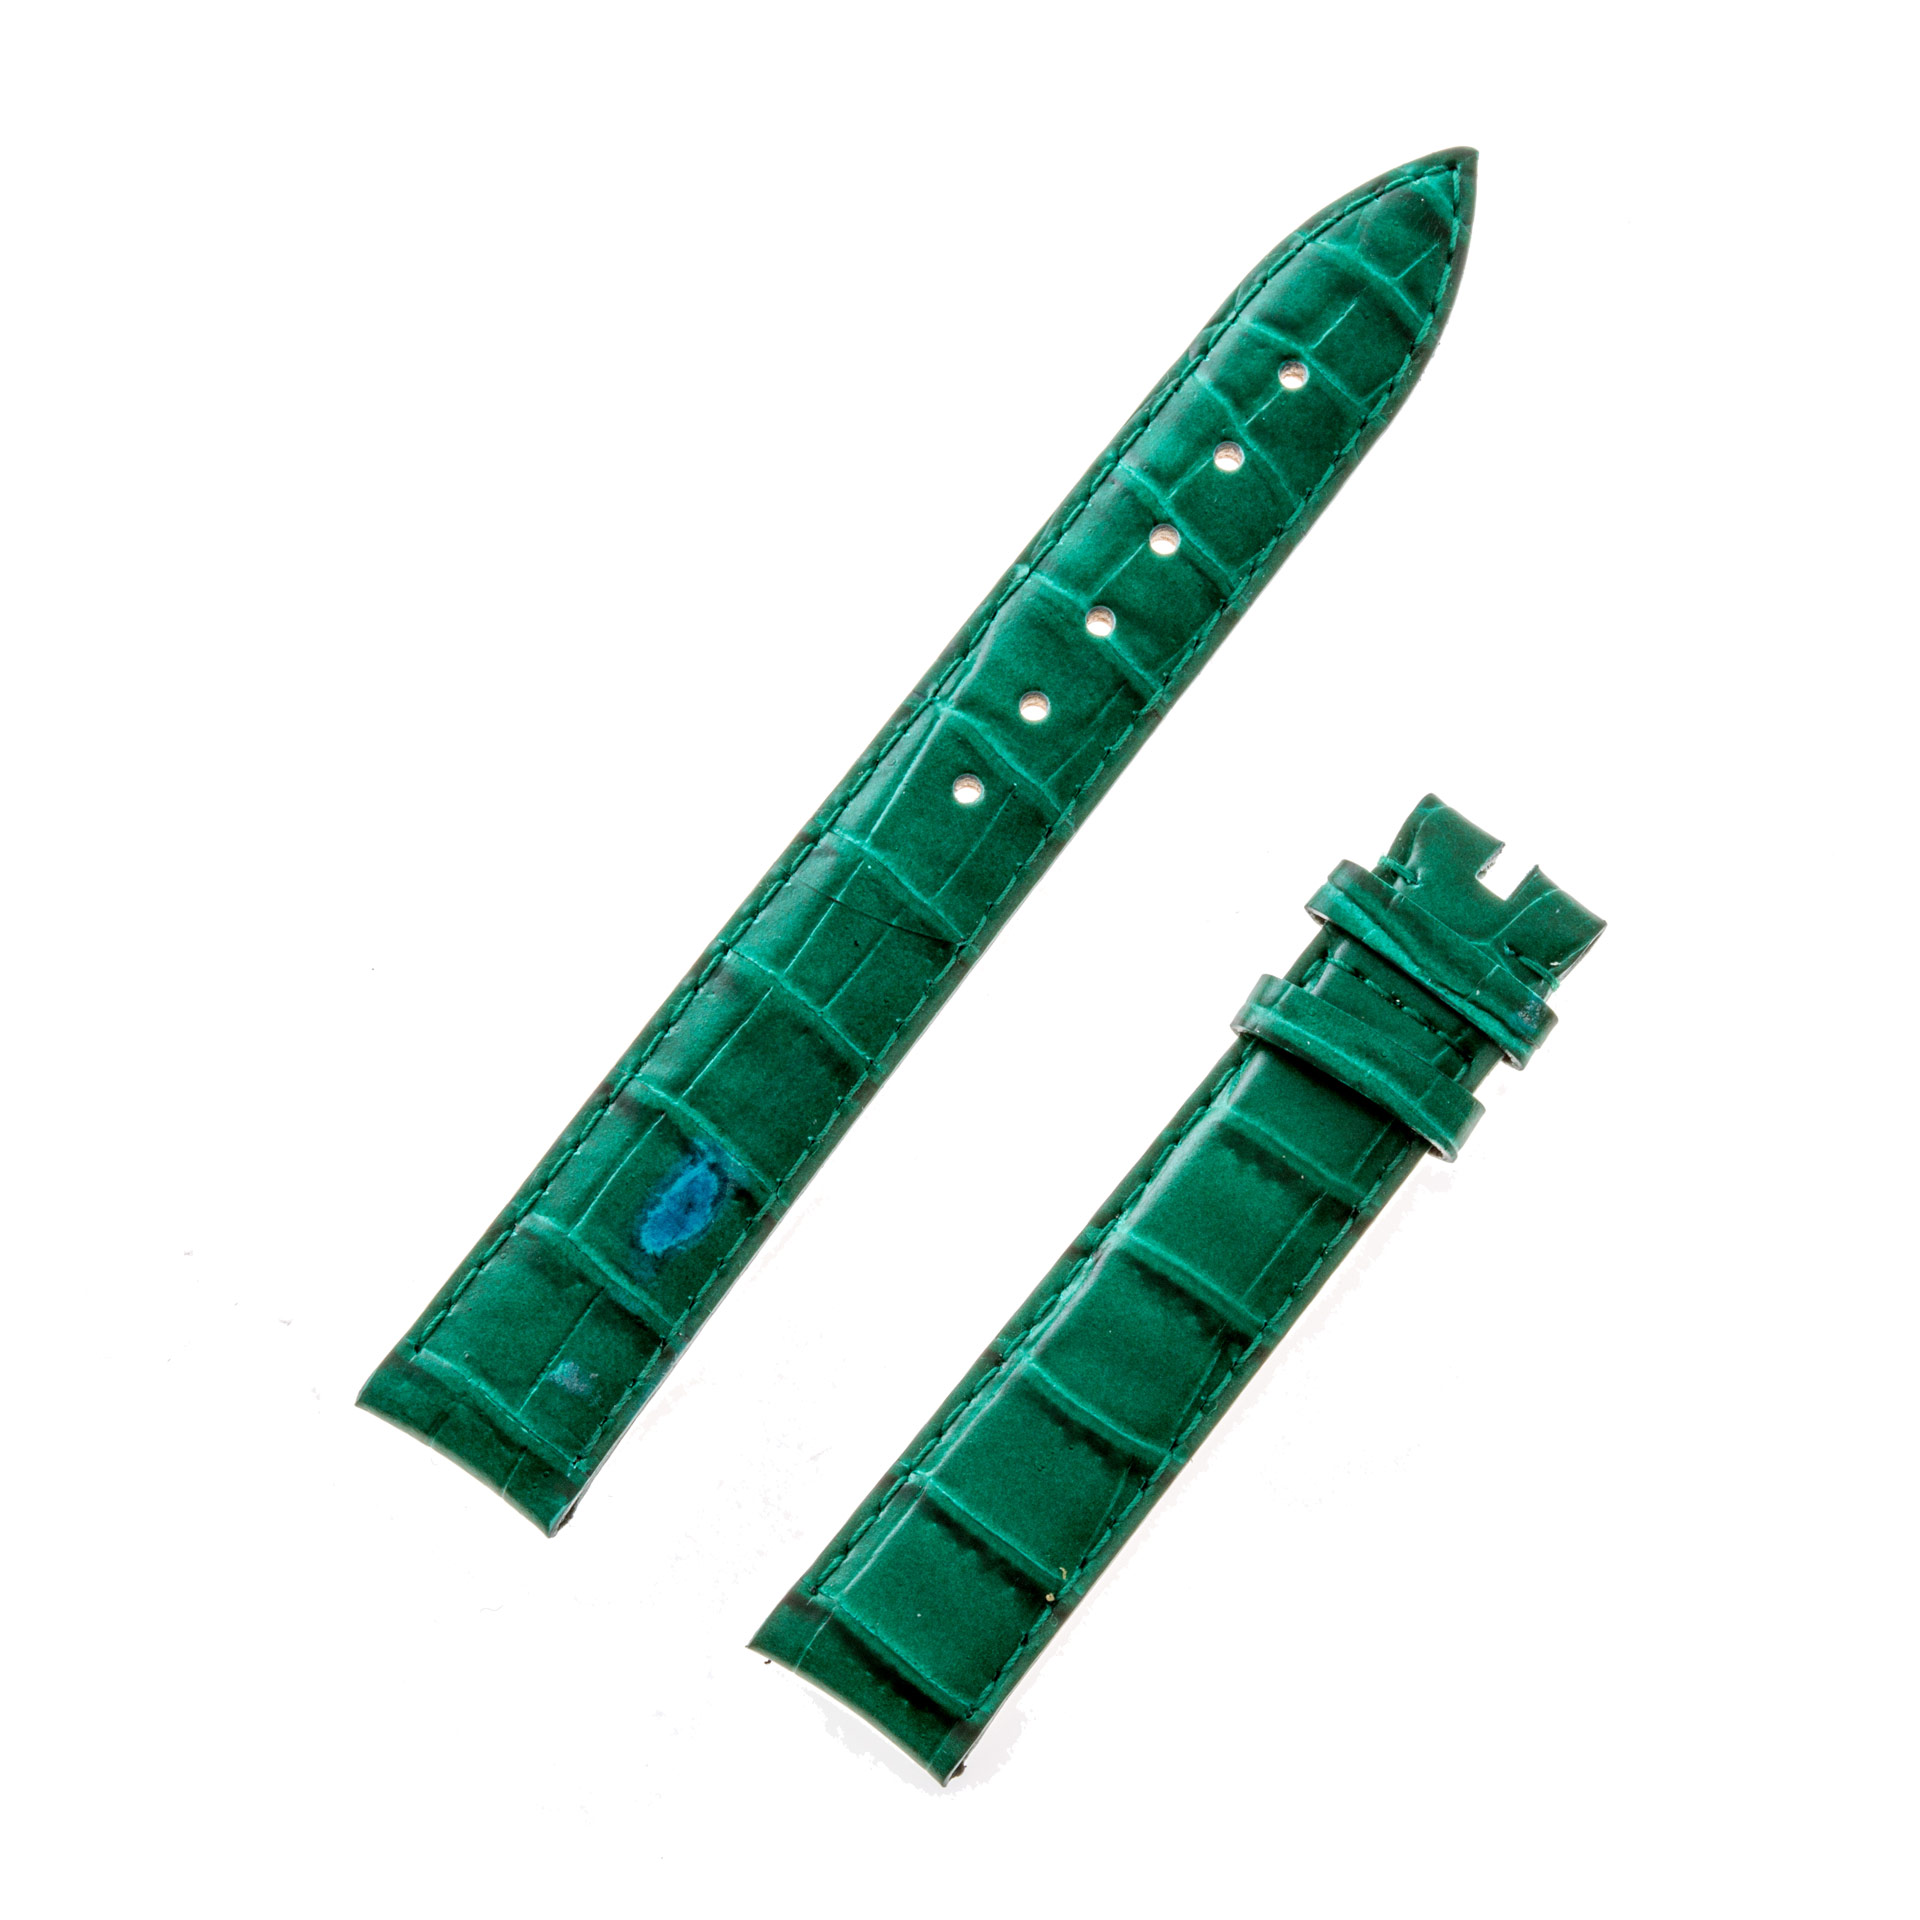 Chopard green alligator leather strap for Be Happy for tang buckle 15mm x 14mm image 1